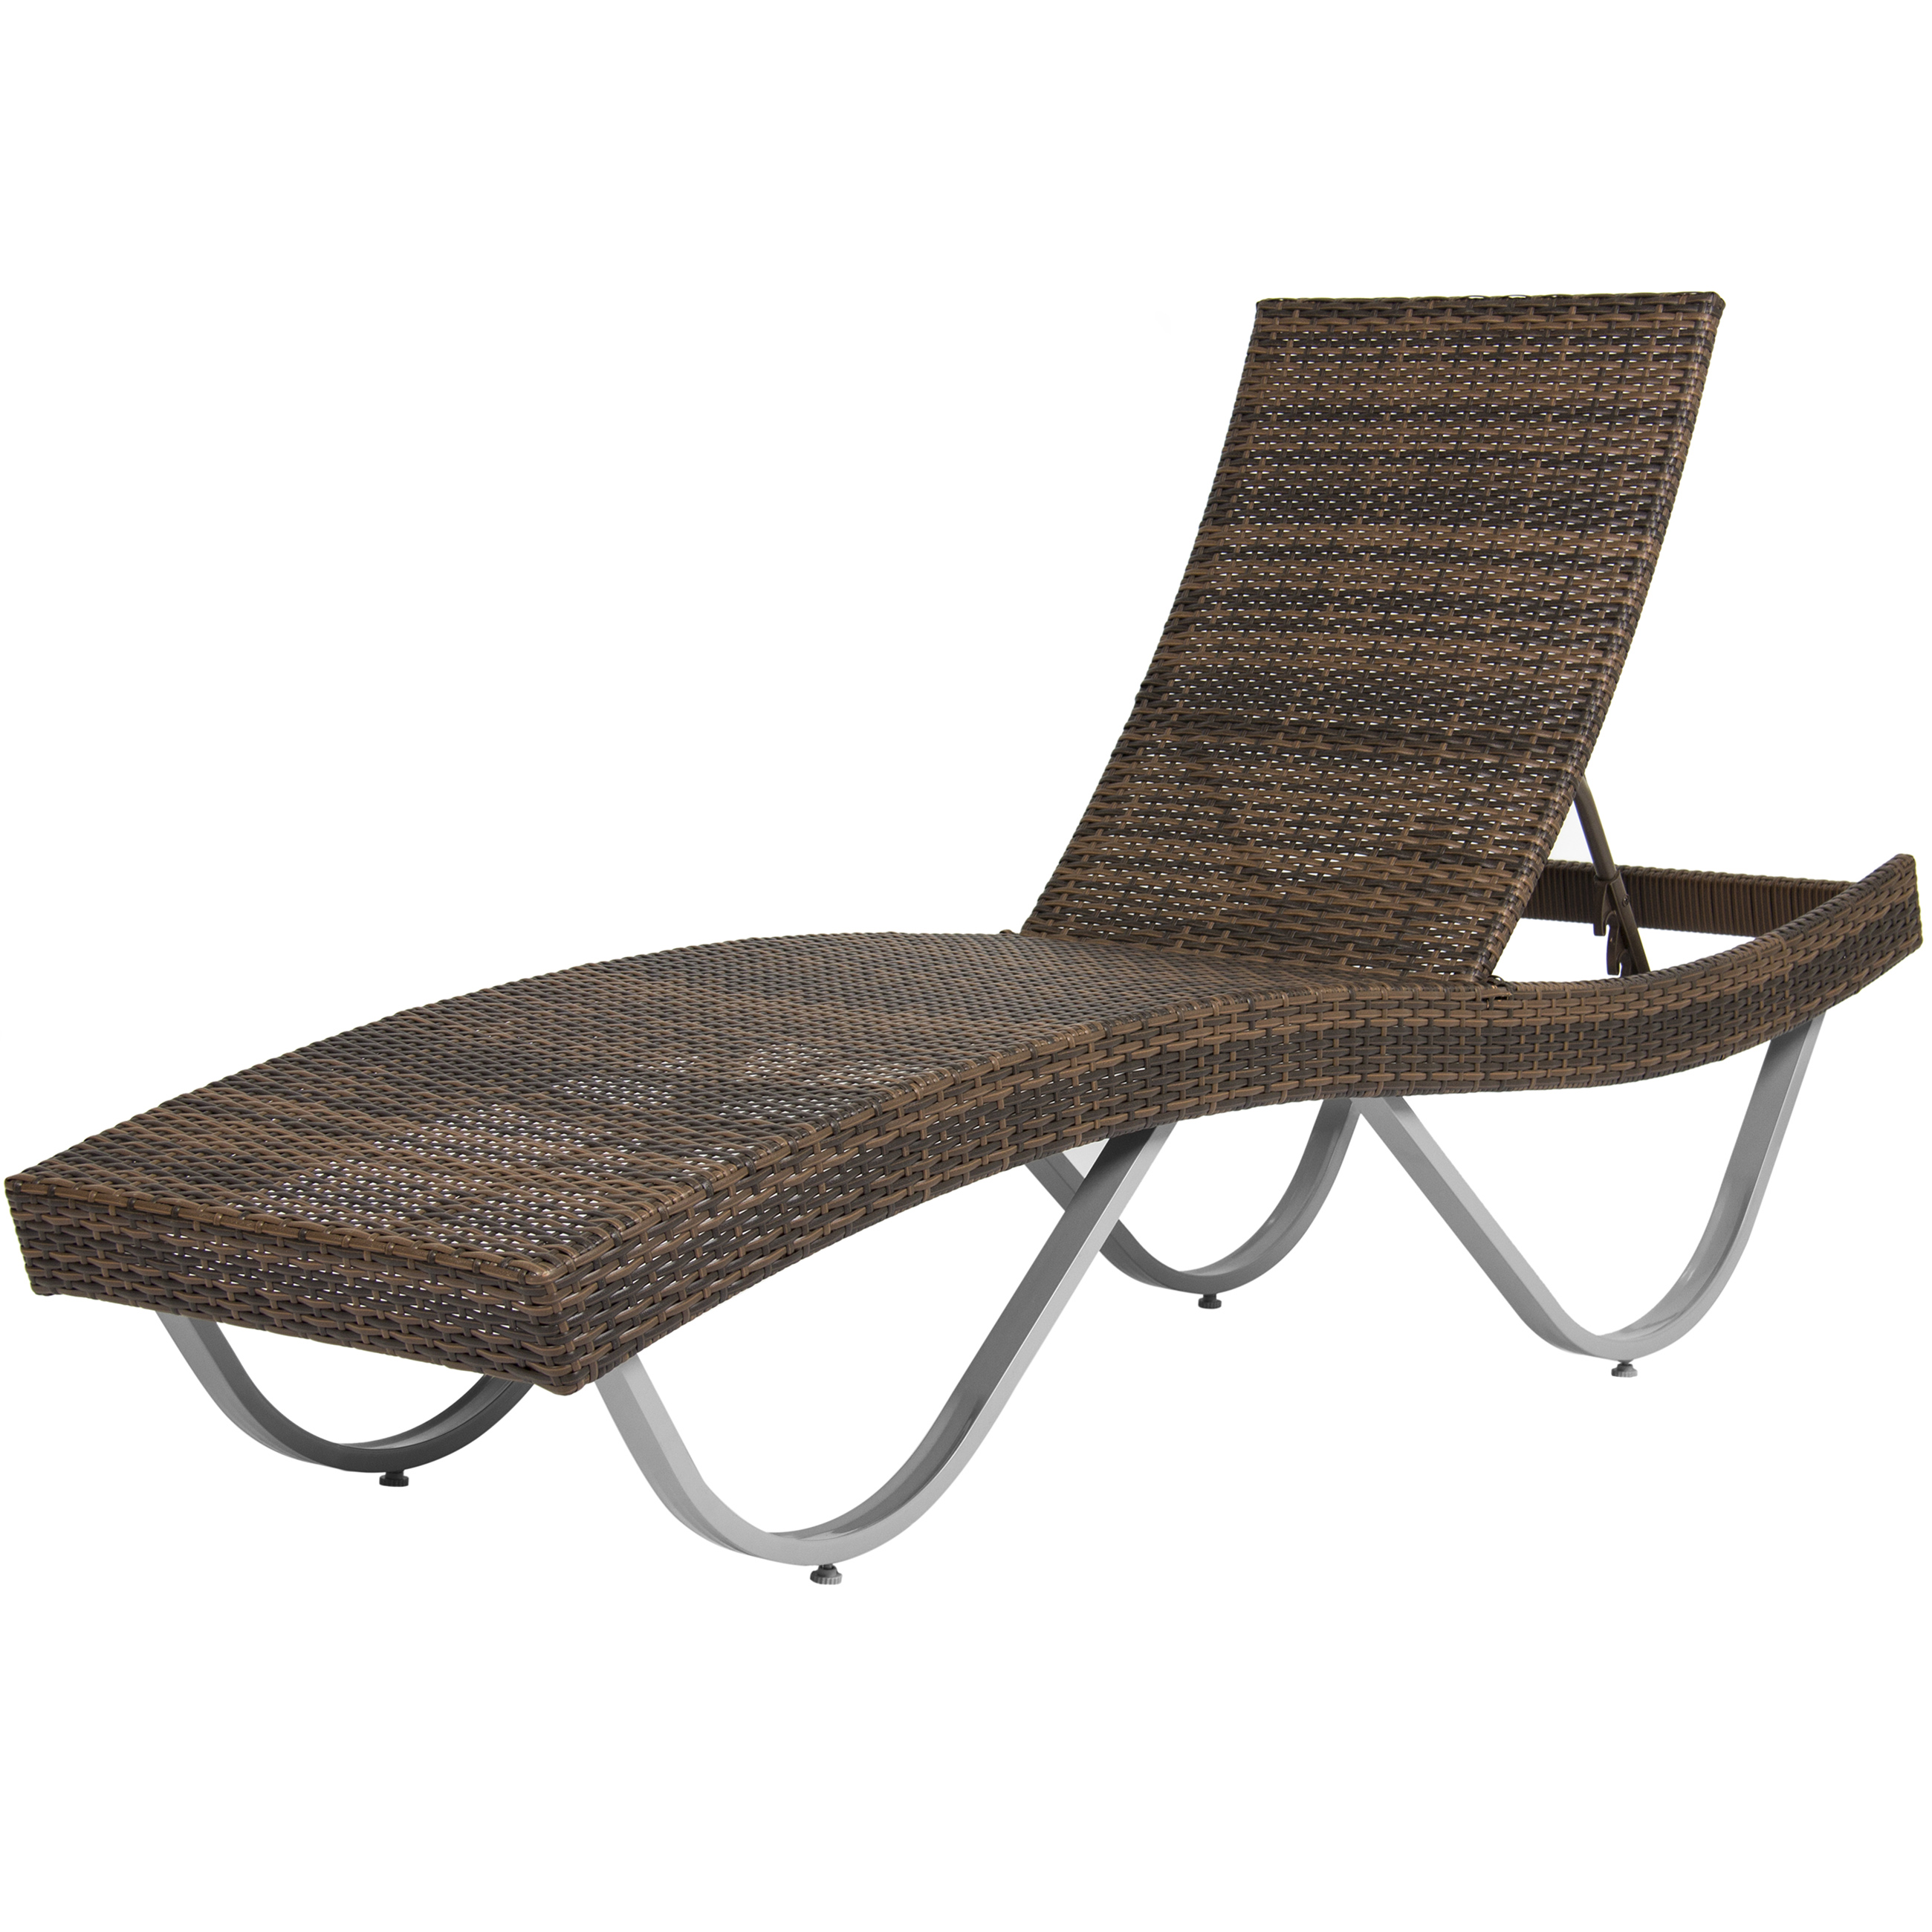 Rattan Outdoor Lounge Chair photo - 2